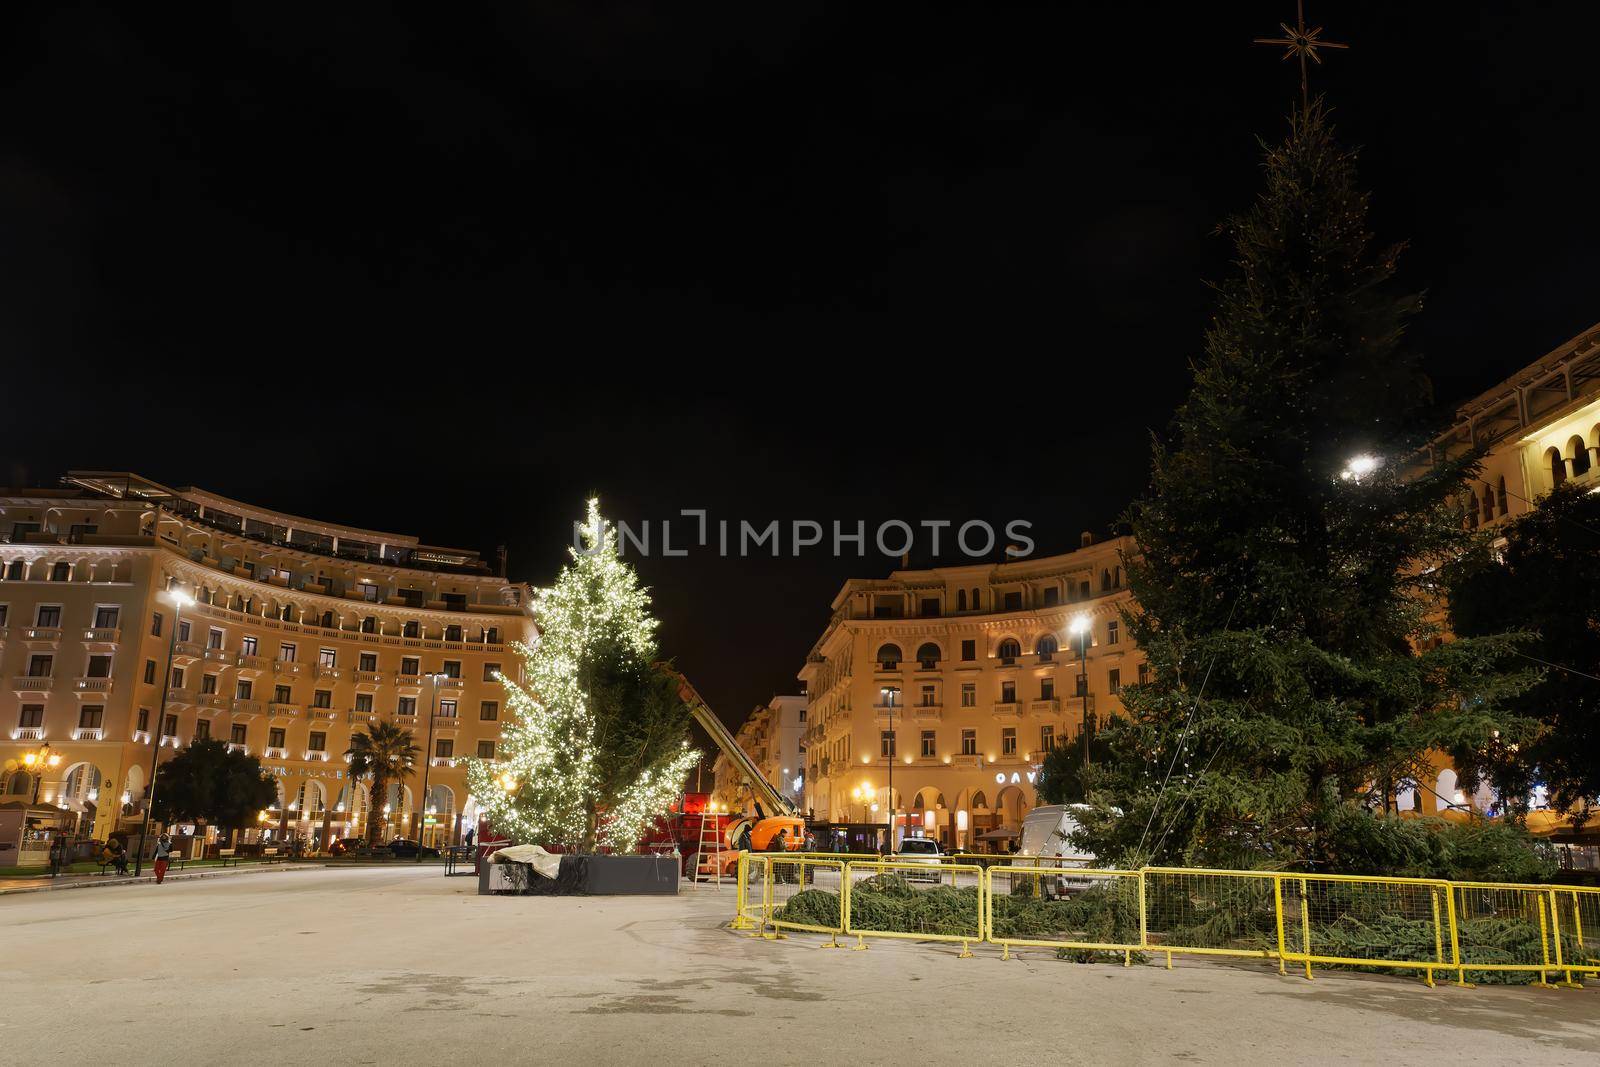 Night view of festive instalments at the southern part of main city square.